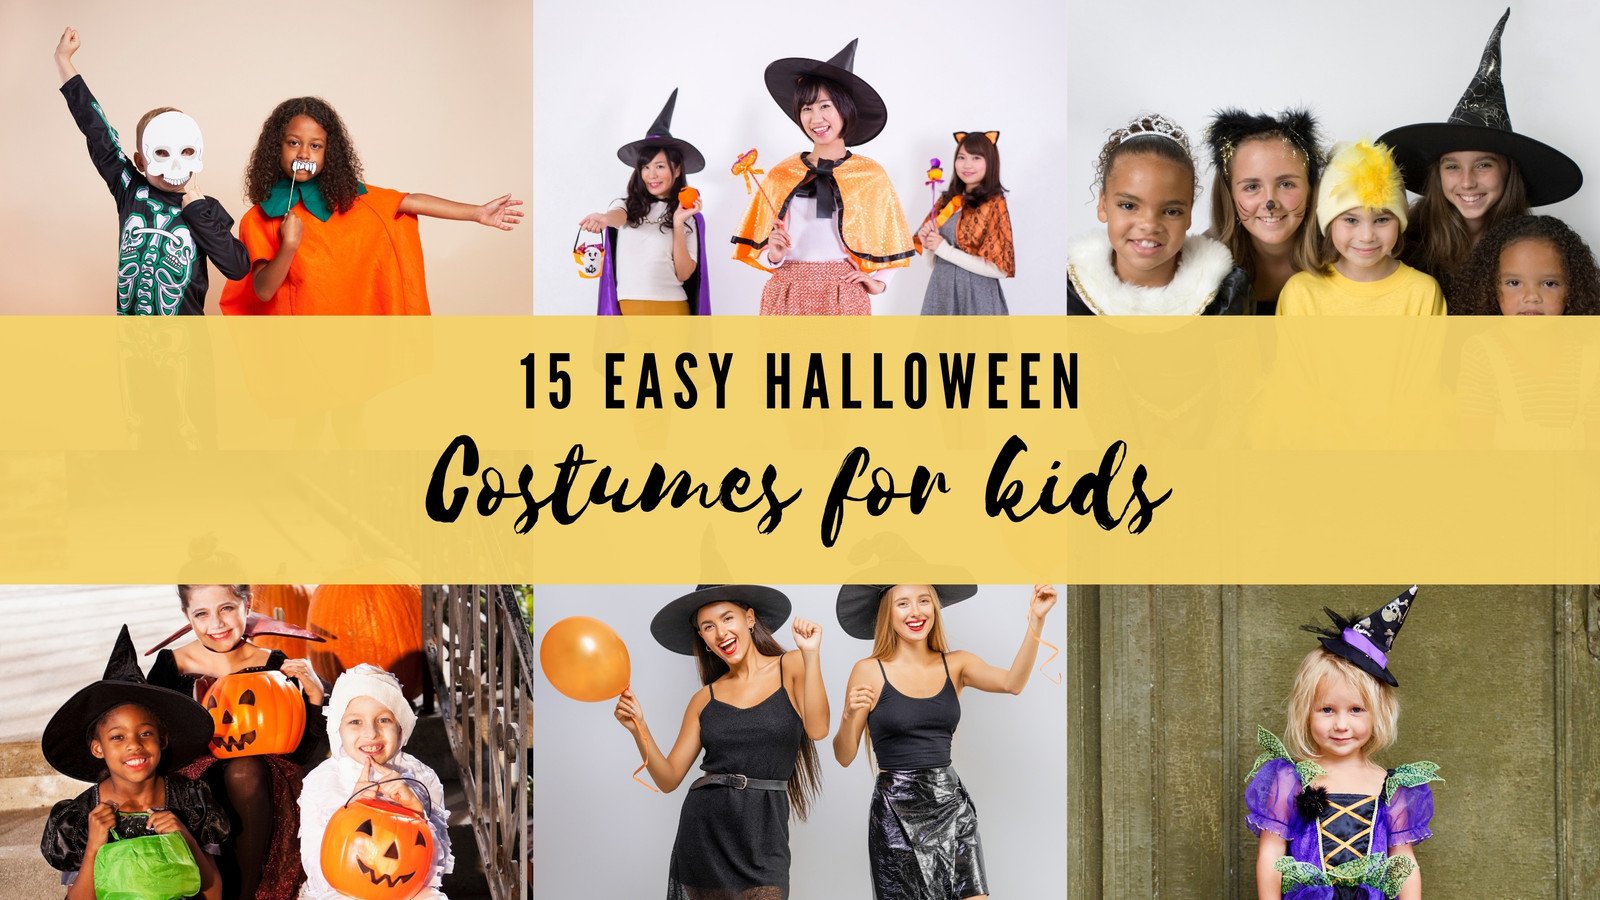 Page 2 - Free and editable Halloween video templates | Canva